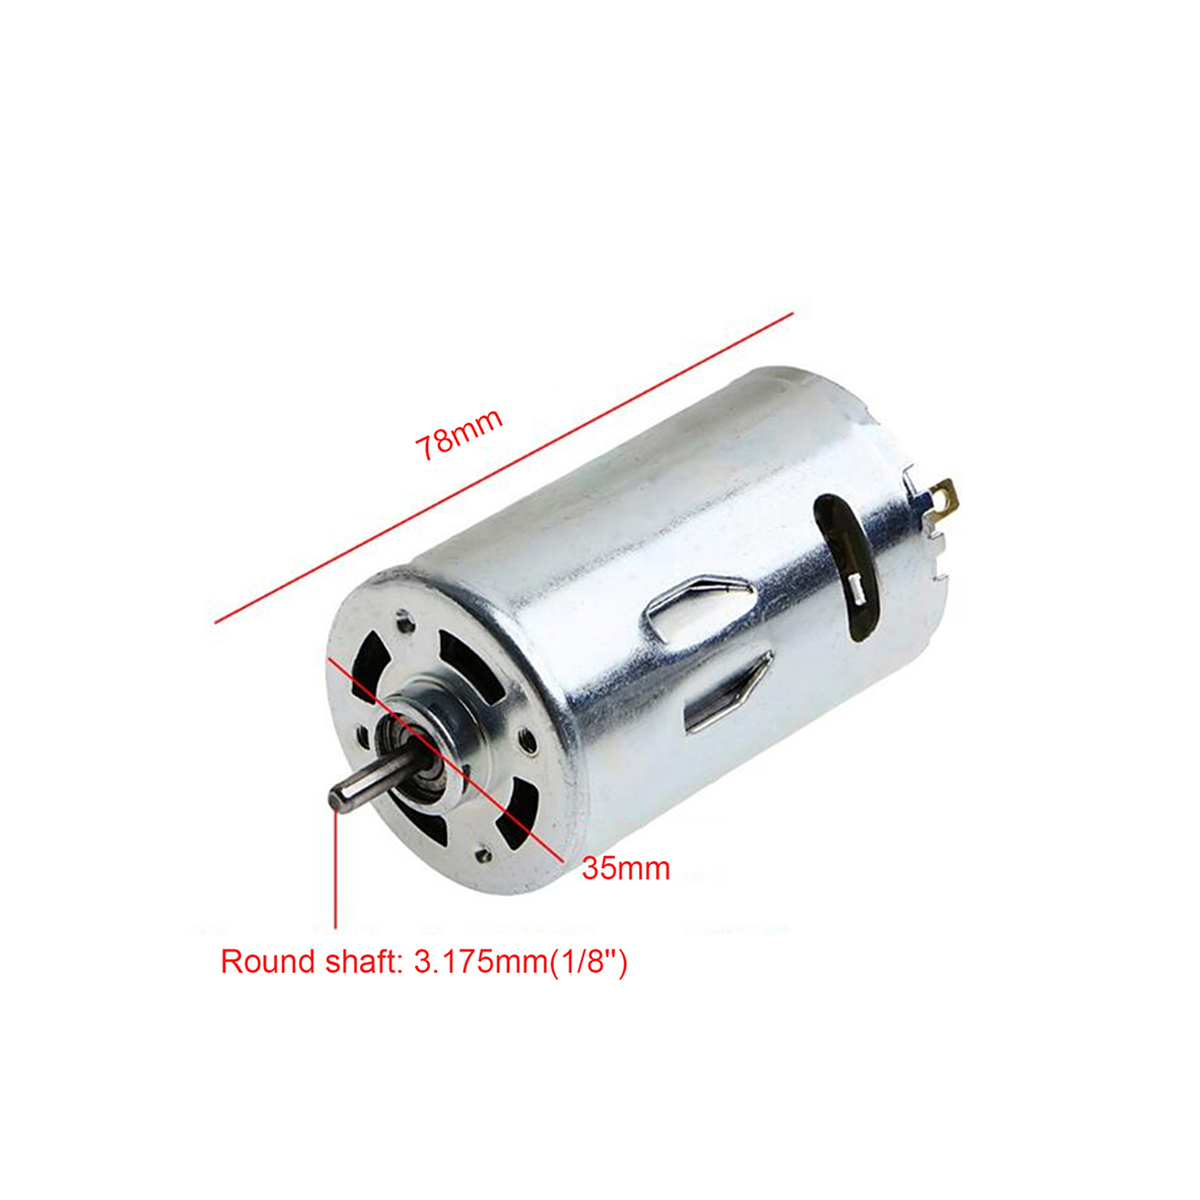 Machifit-DC-12-36V-Lathe-Press-555-Motor-With-Miniature-Hand-Drill-Chuck-and-Mounting-Bracket-1144675-3